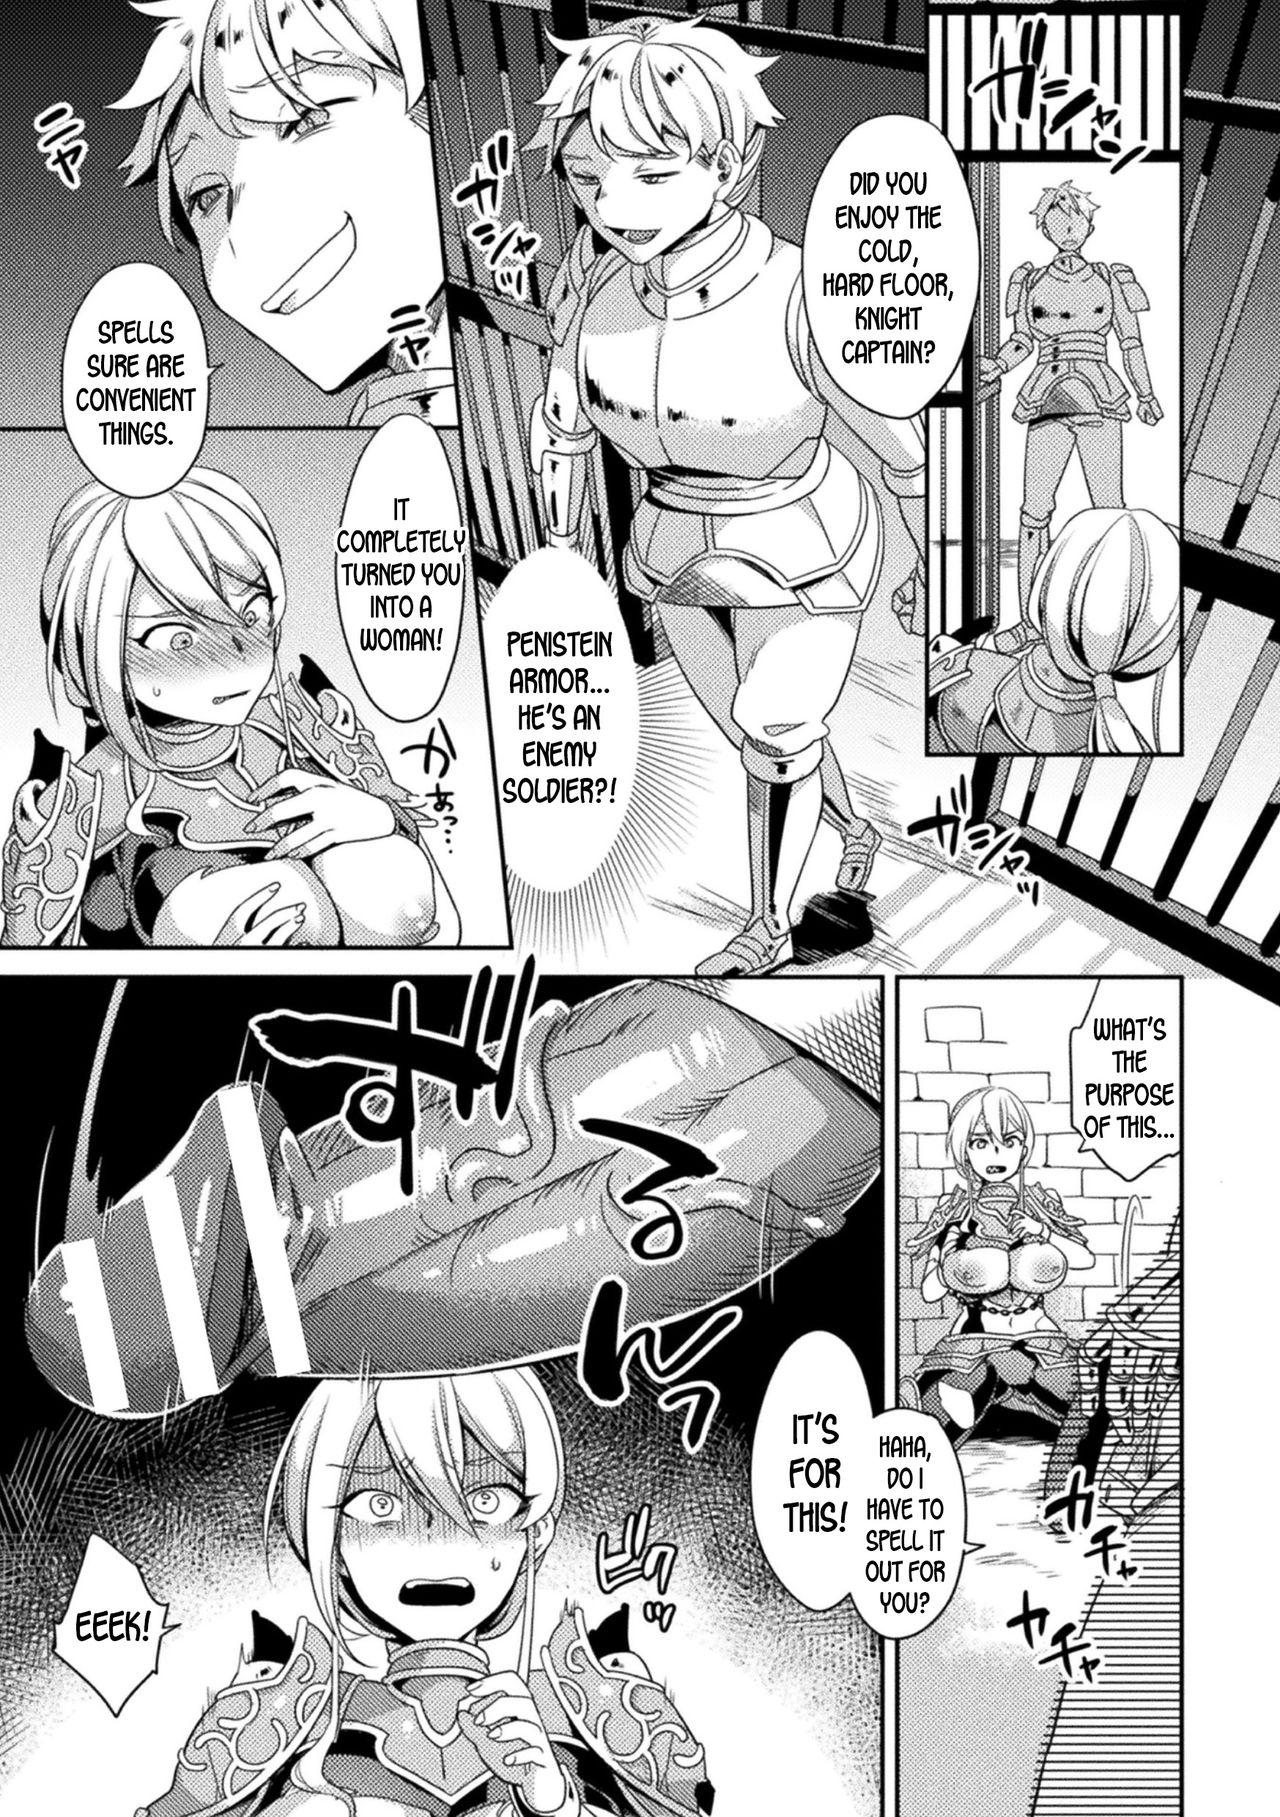 Caught Genderbent Knight Raul, the Fallen Whore ~ He couldn't win against money and cocks Hidden - Page 3